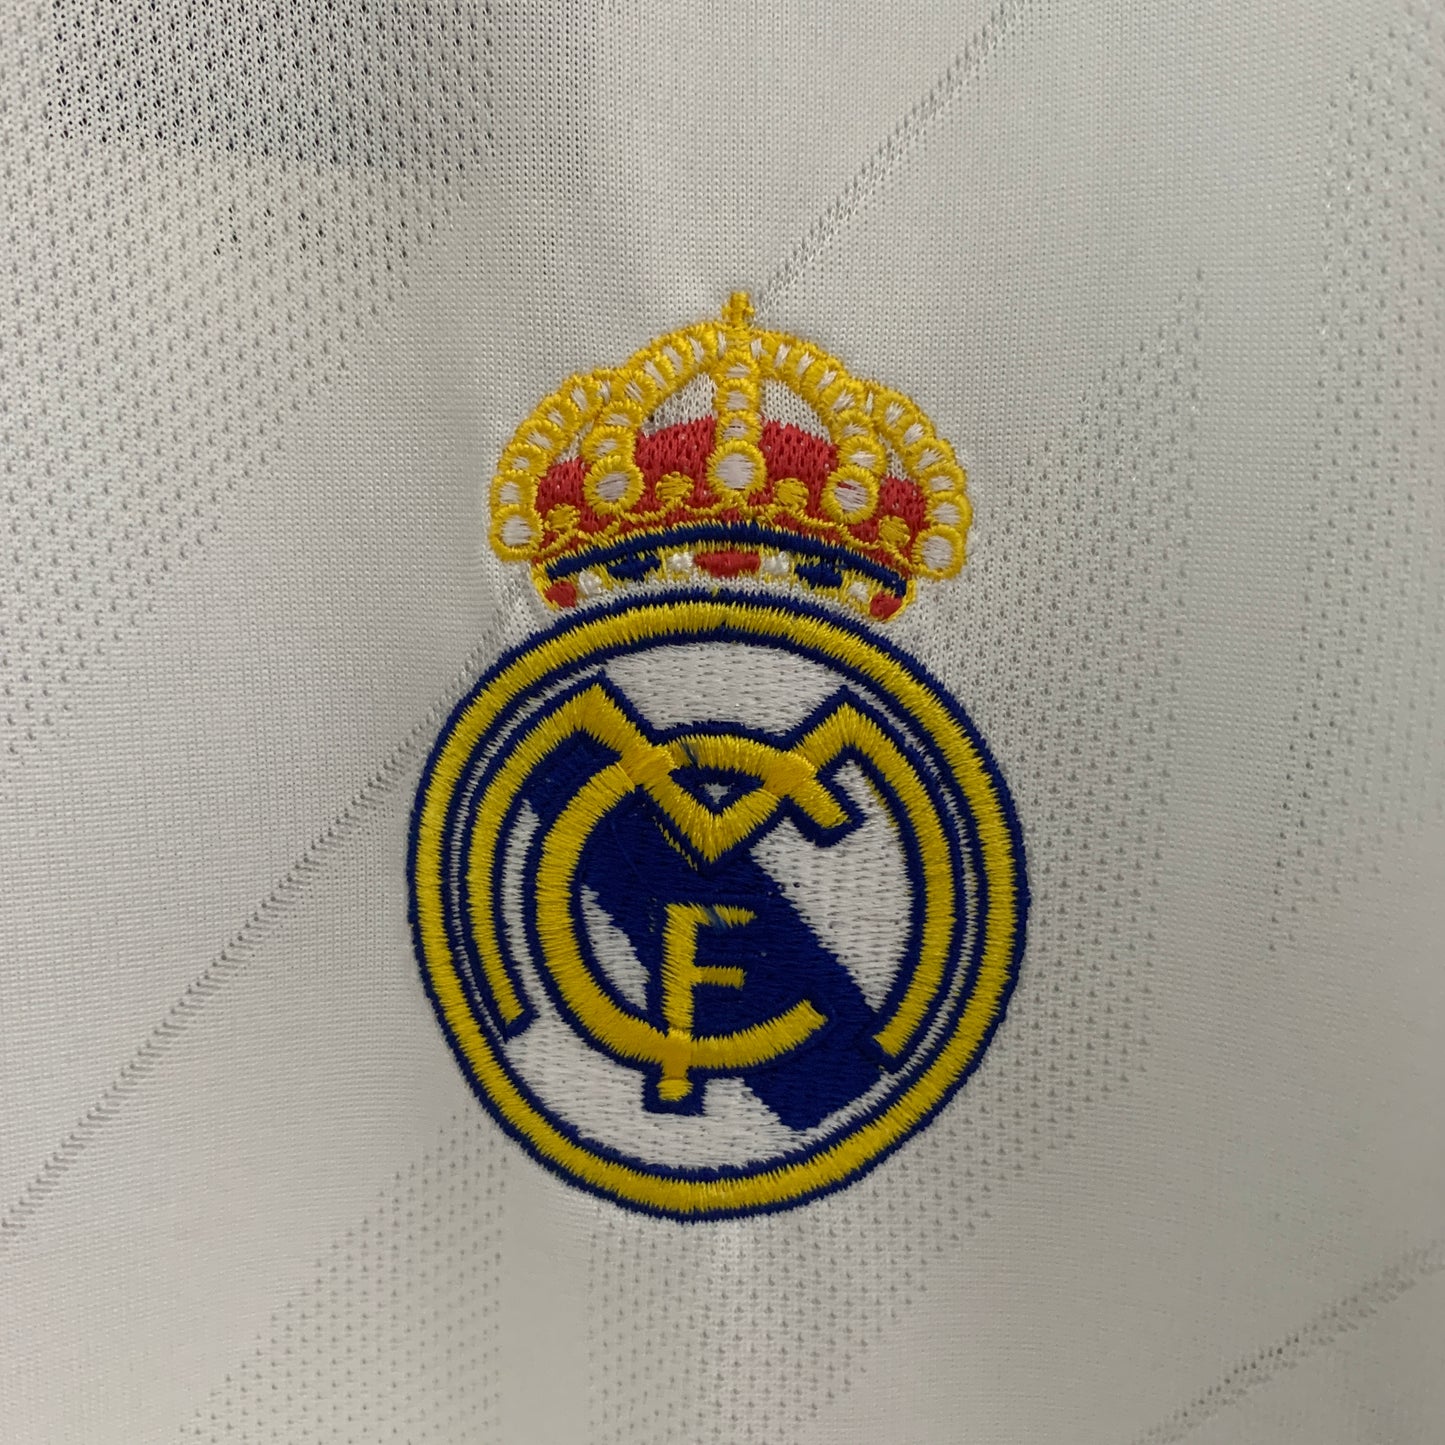 REAL MADRID 2017 - 2018 HOME JERSEY LONG SLEEVED